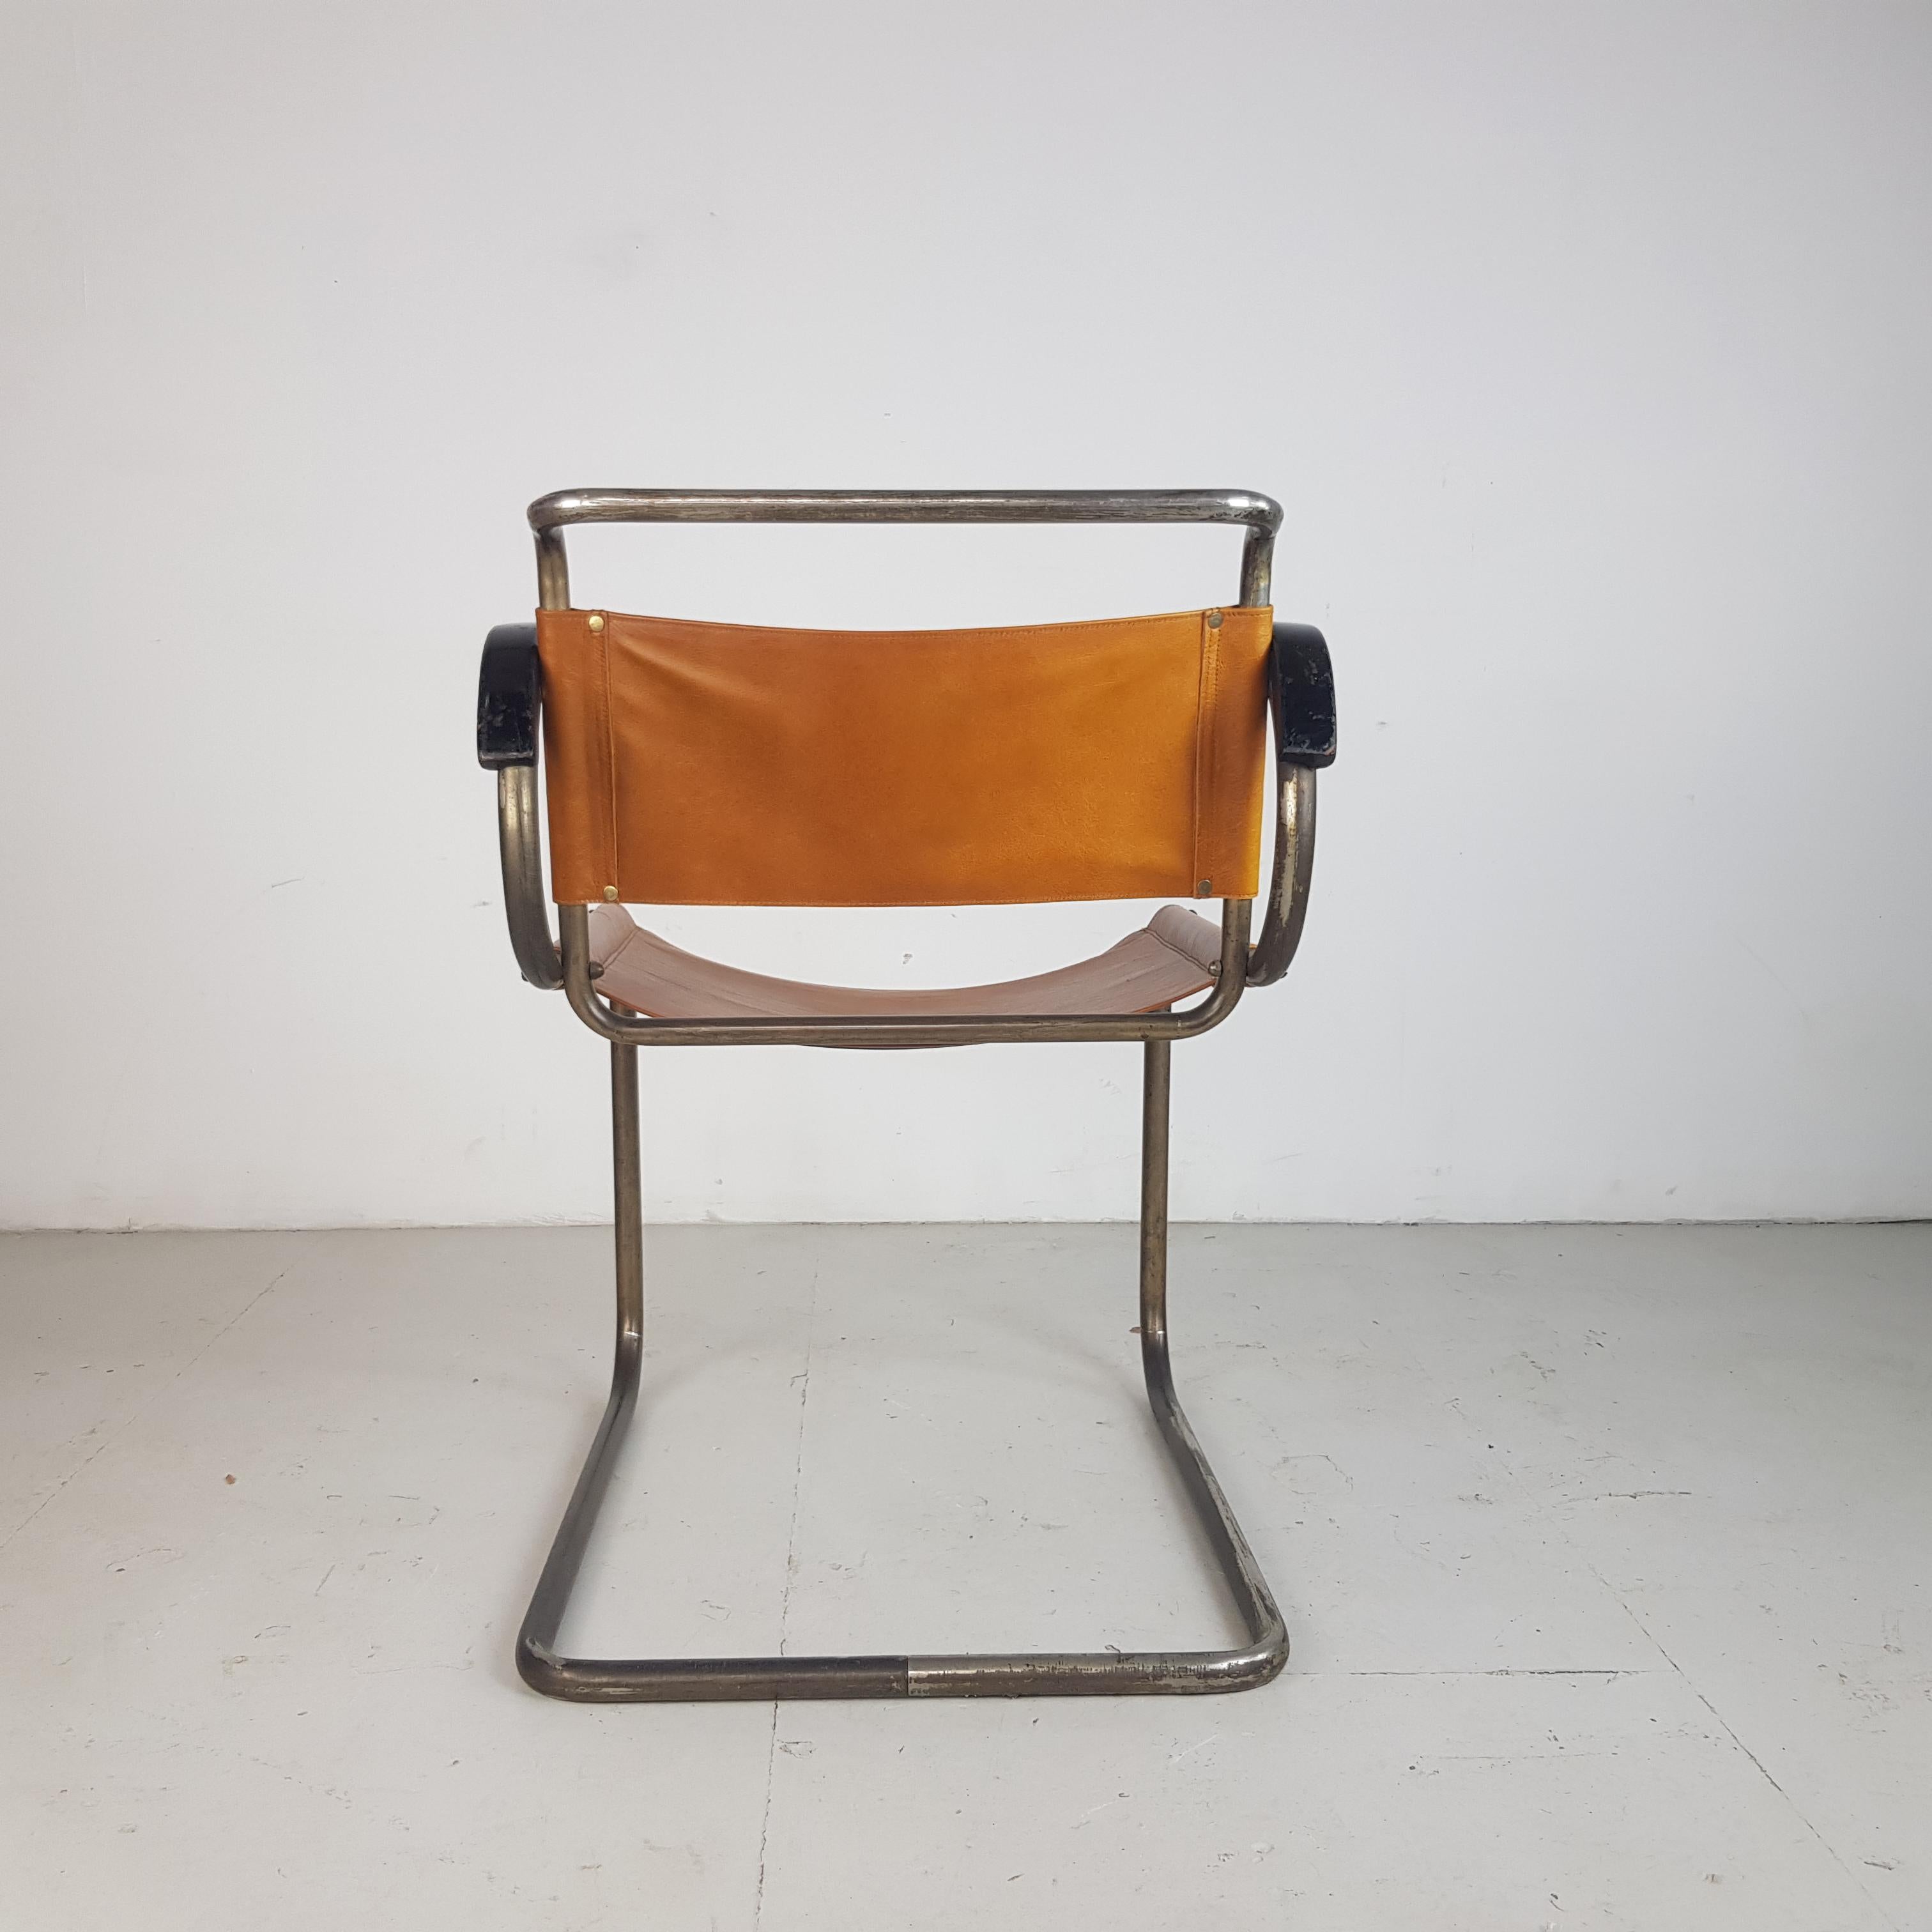 Original 1929 Marcel Breuer B46 Variant Armchair by Thonet Sidam In Good Condition For Sale In Lewes, East Sussex